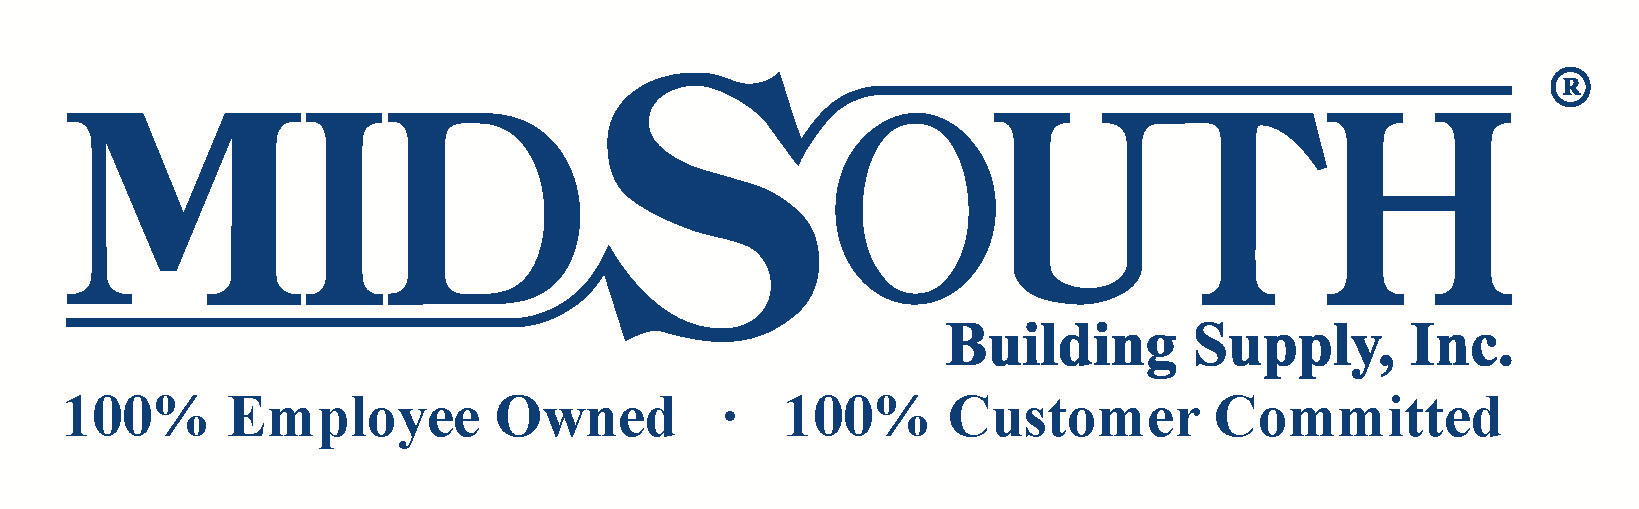 MidSouth Building Supply